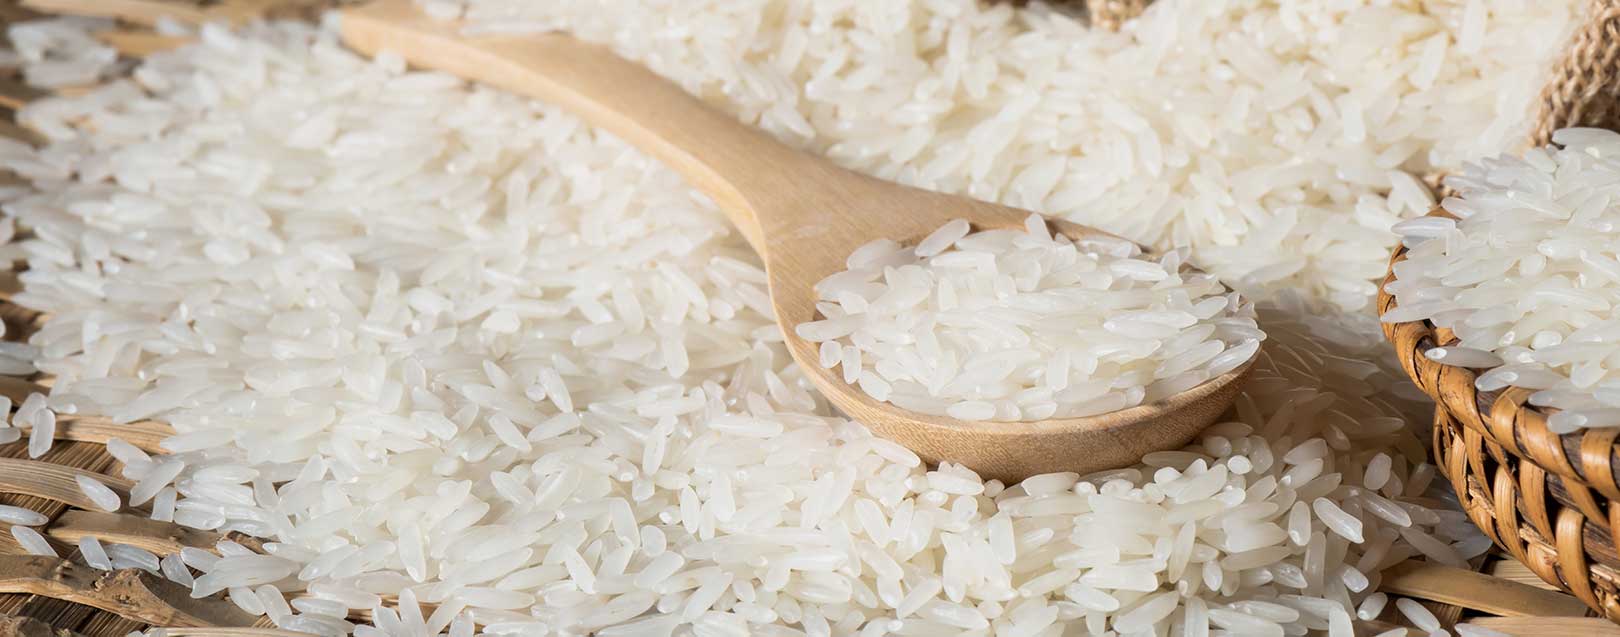 India and EU discuss rice exports issue